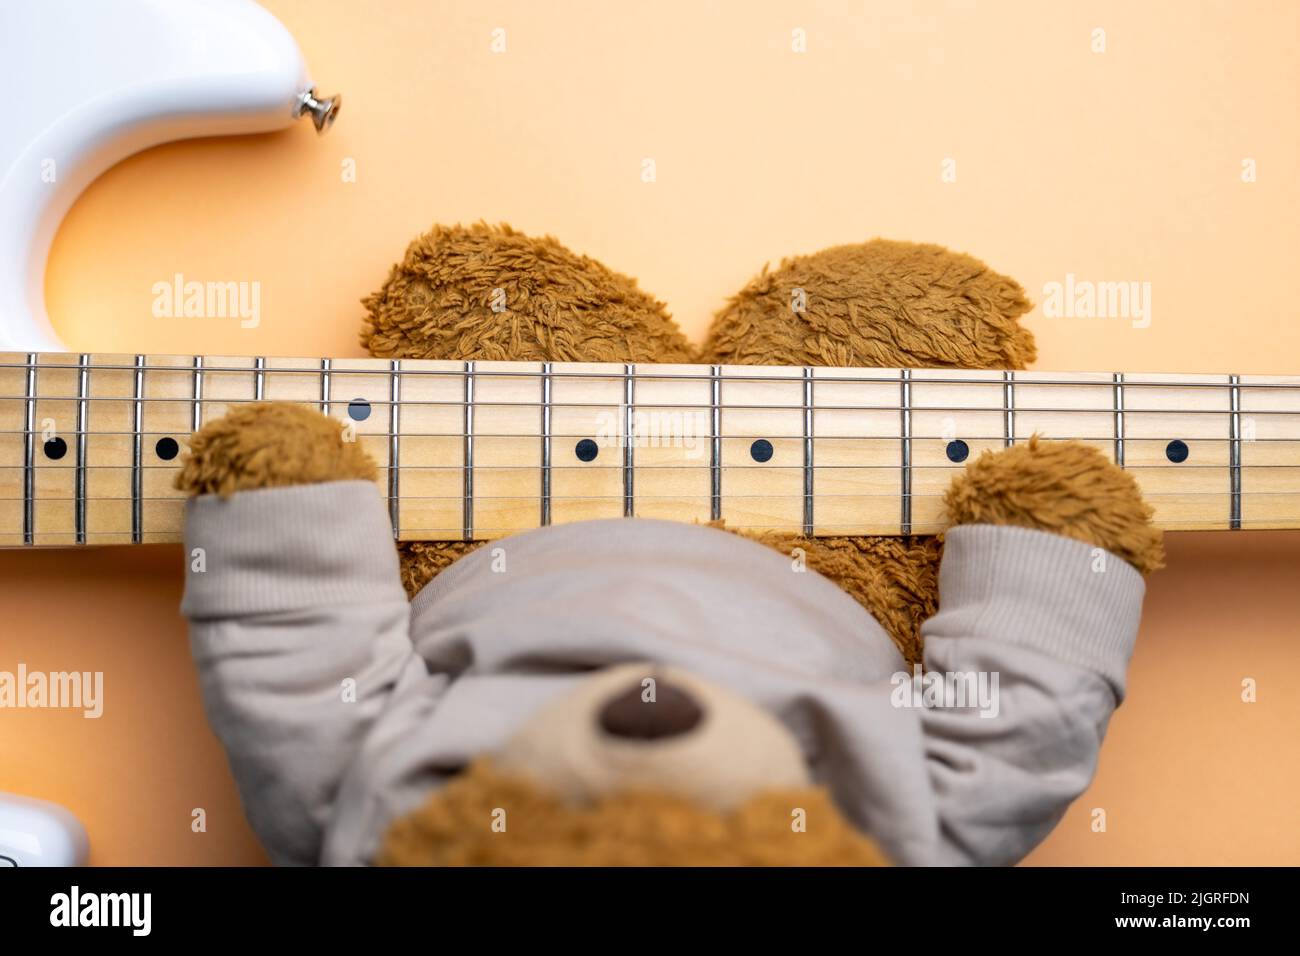 Teddy bear playing guitar. Top down view. Plush toy with the Guitar neck in Focus. Stock Photo